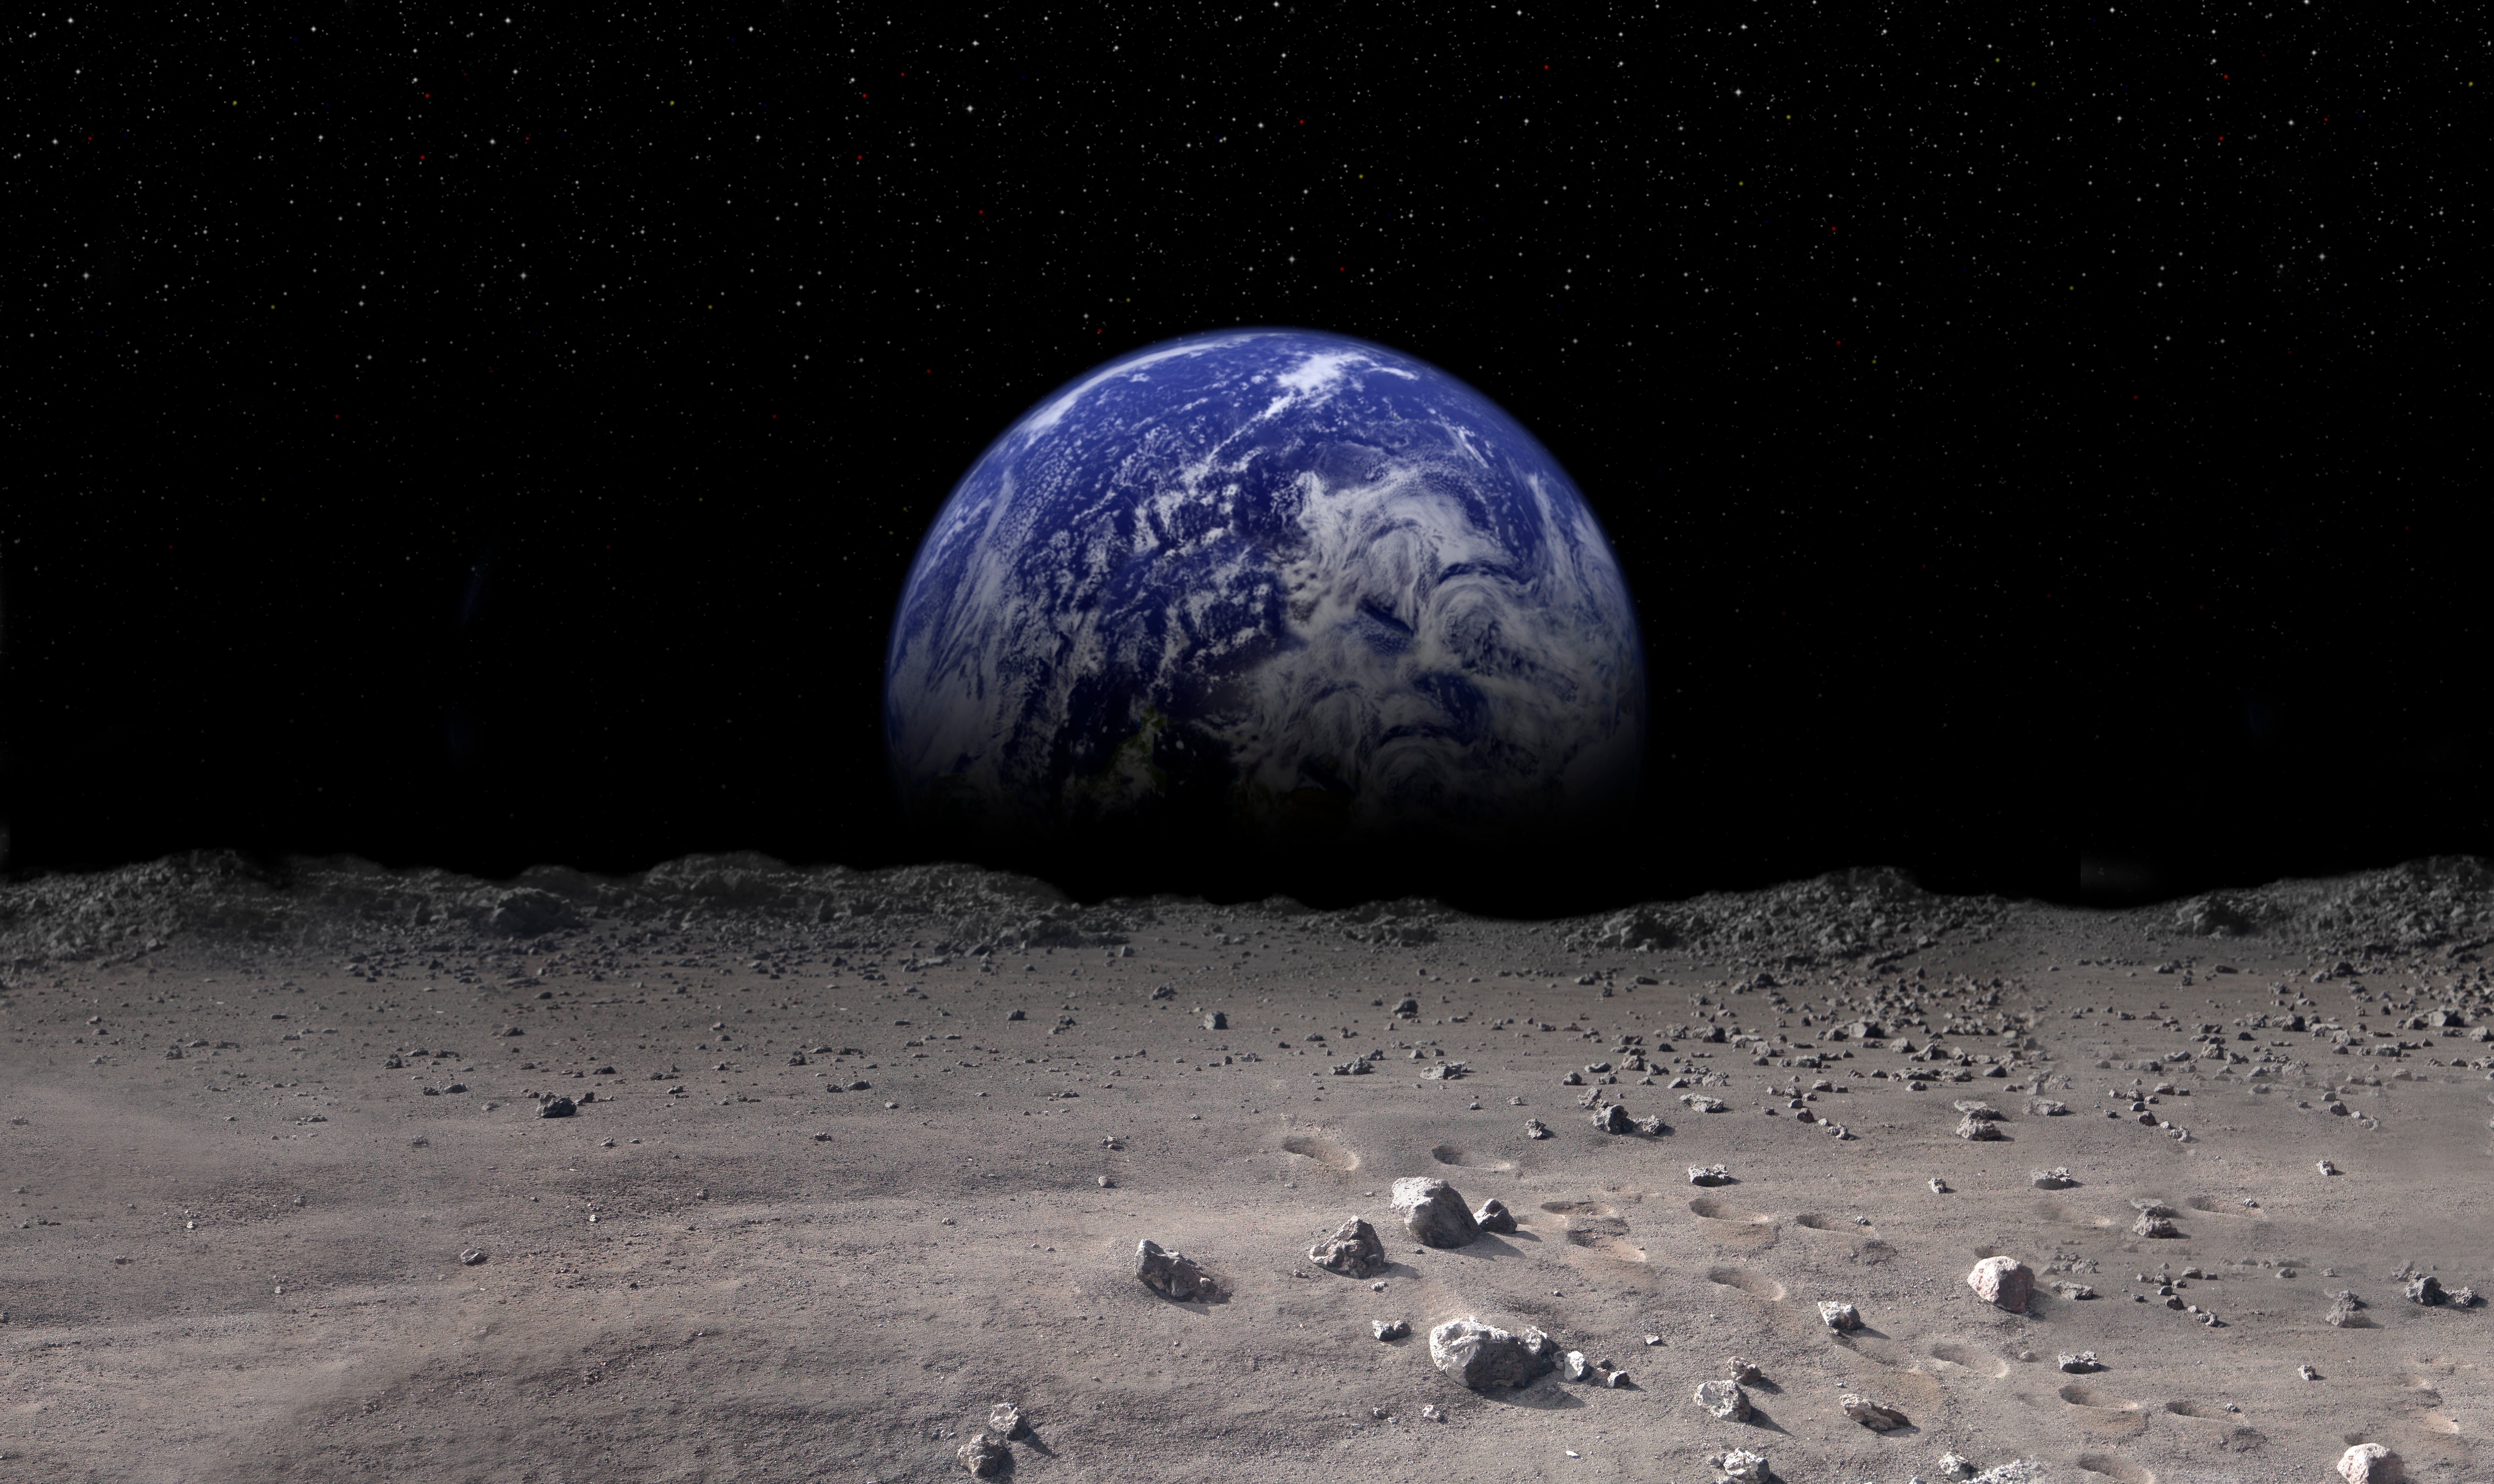 The study found that moon soil can convert carbon dioxide into oxygen